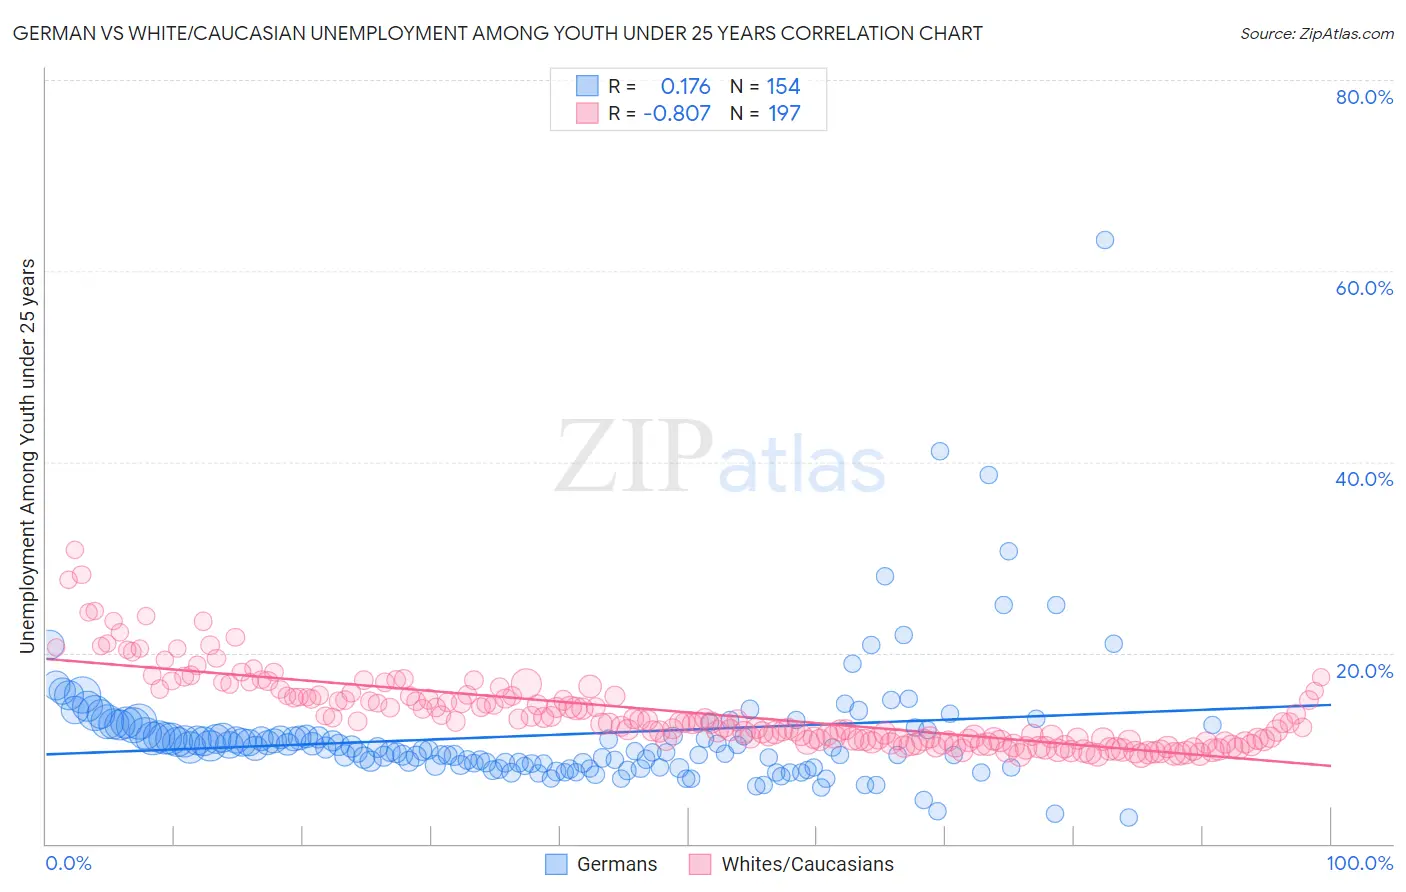 German vs White/Caucasian Unemployment Among Youth under 25 years